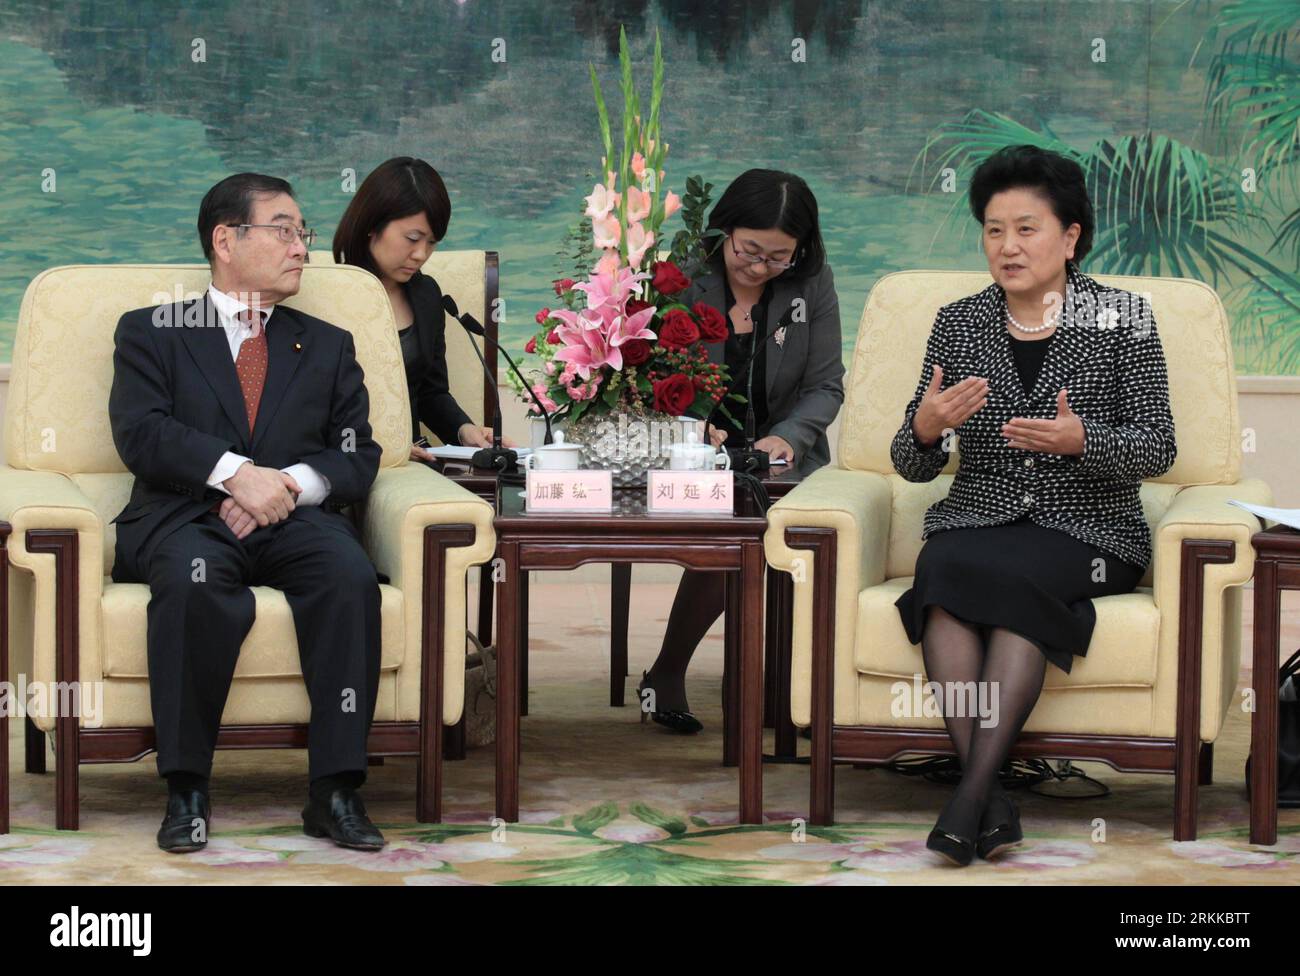 Bildnummer: 56223163  Datum: 27.10.2011  Copyright: imago/Xinhua (111027) -- BEIJING, Oct. 27, 2011 (Xinhua) -- Chinese State Councilor Liu Yandong (1st R) meets with Koichi Kato (1st L), chairman of the Japan-China Friendship Association and the former secretary-general of the Japanese Liberal Democratic Party (LDP), in Beijing, capital of China, Oct. 27, 2011. Liu met with a visiting Japanese delegation headed by Koichi Kato Thursday. (Xinhua/Pang Xinglei) (ly) CHINA-BEIJING-LIU YANDONG-JAPANESE DELEGATION-MEETING (CN) PUBLICATIONxNOTxINxCHN People Politik x0x xst 2011 quer      56223163 Dat Stock Photo